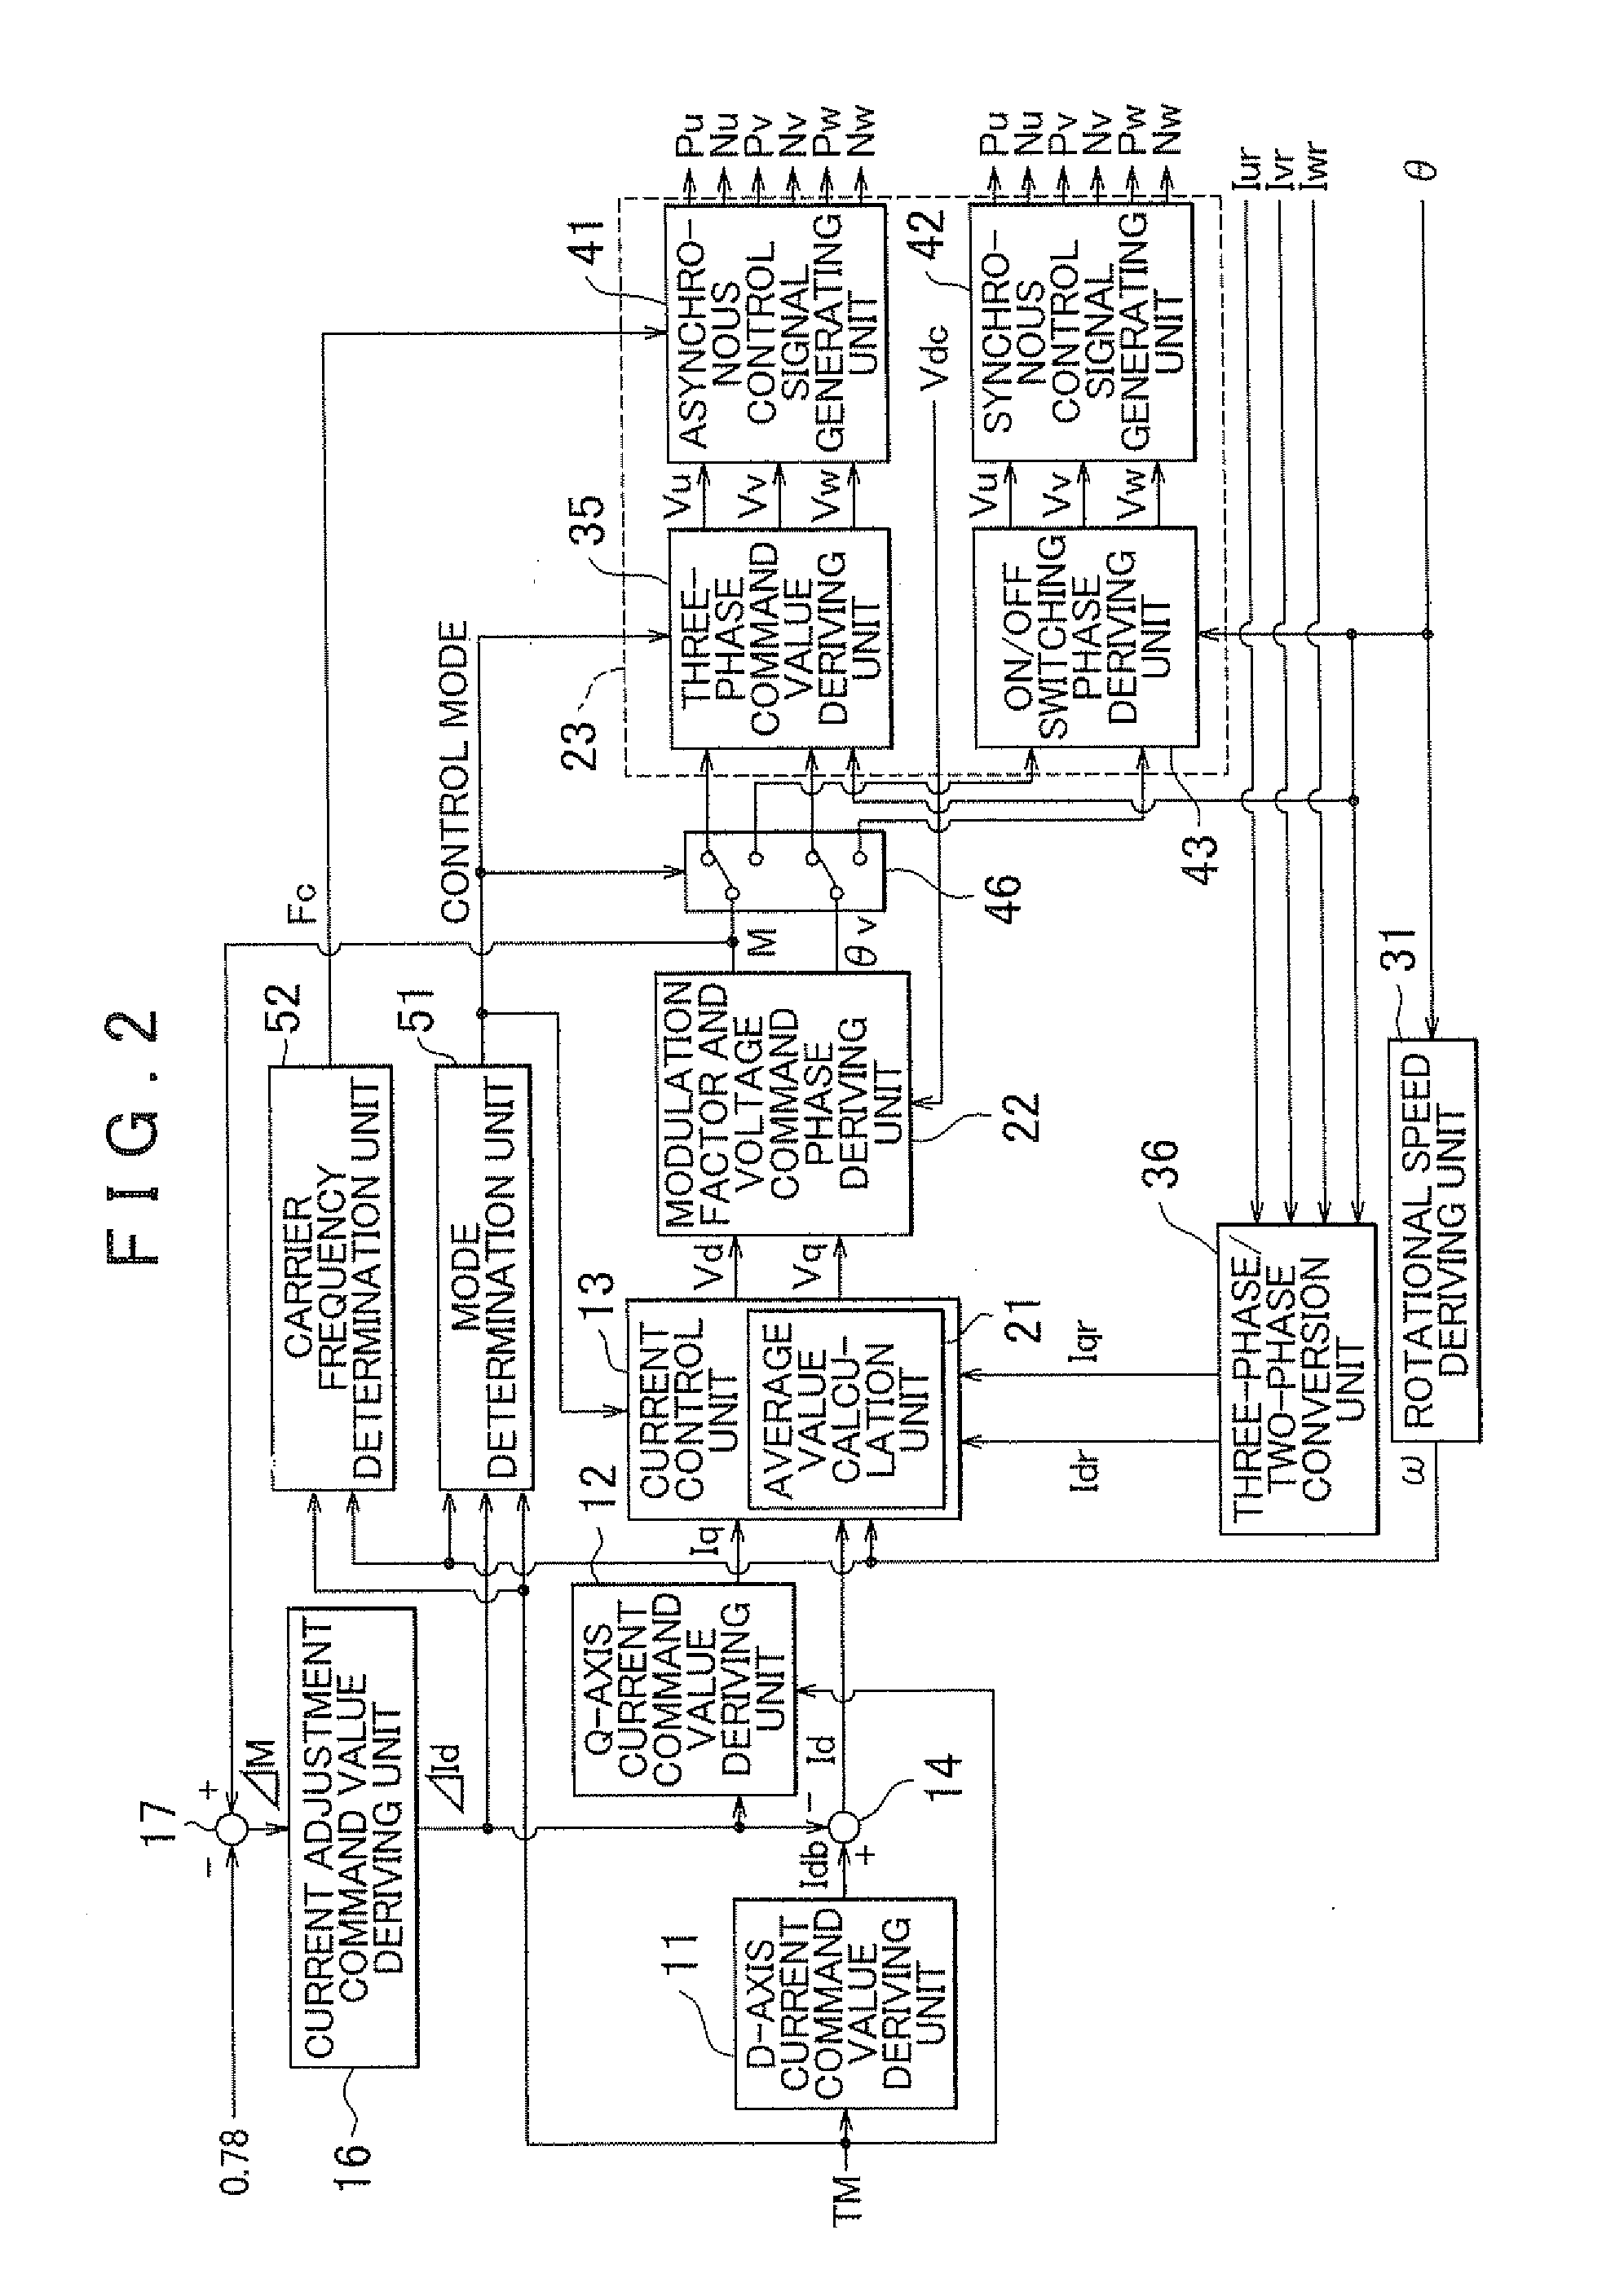 Control device for electric motor drive apparatus